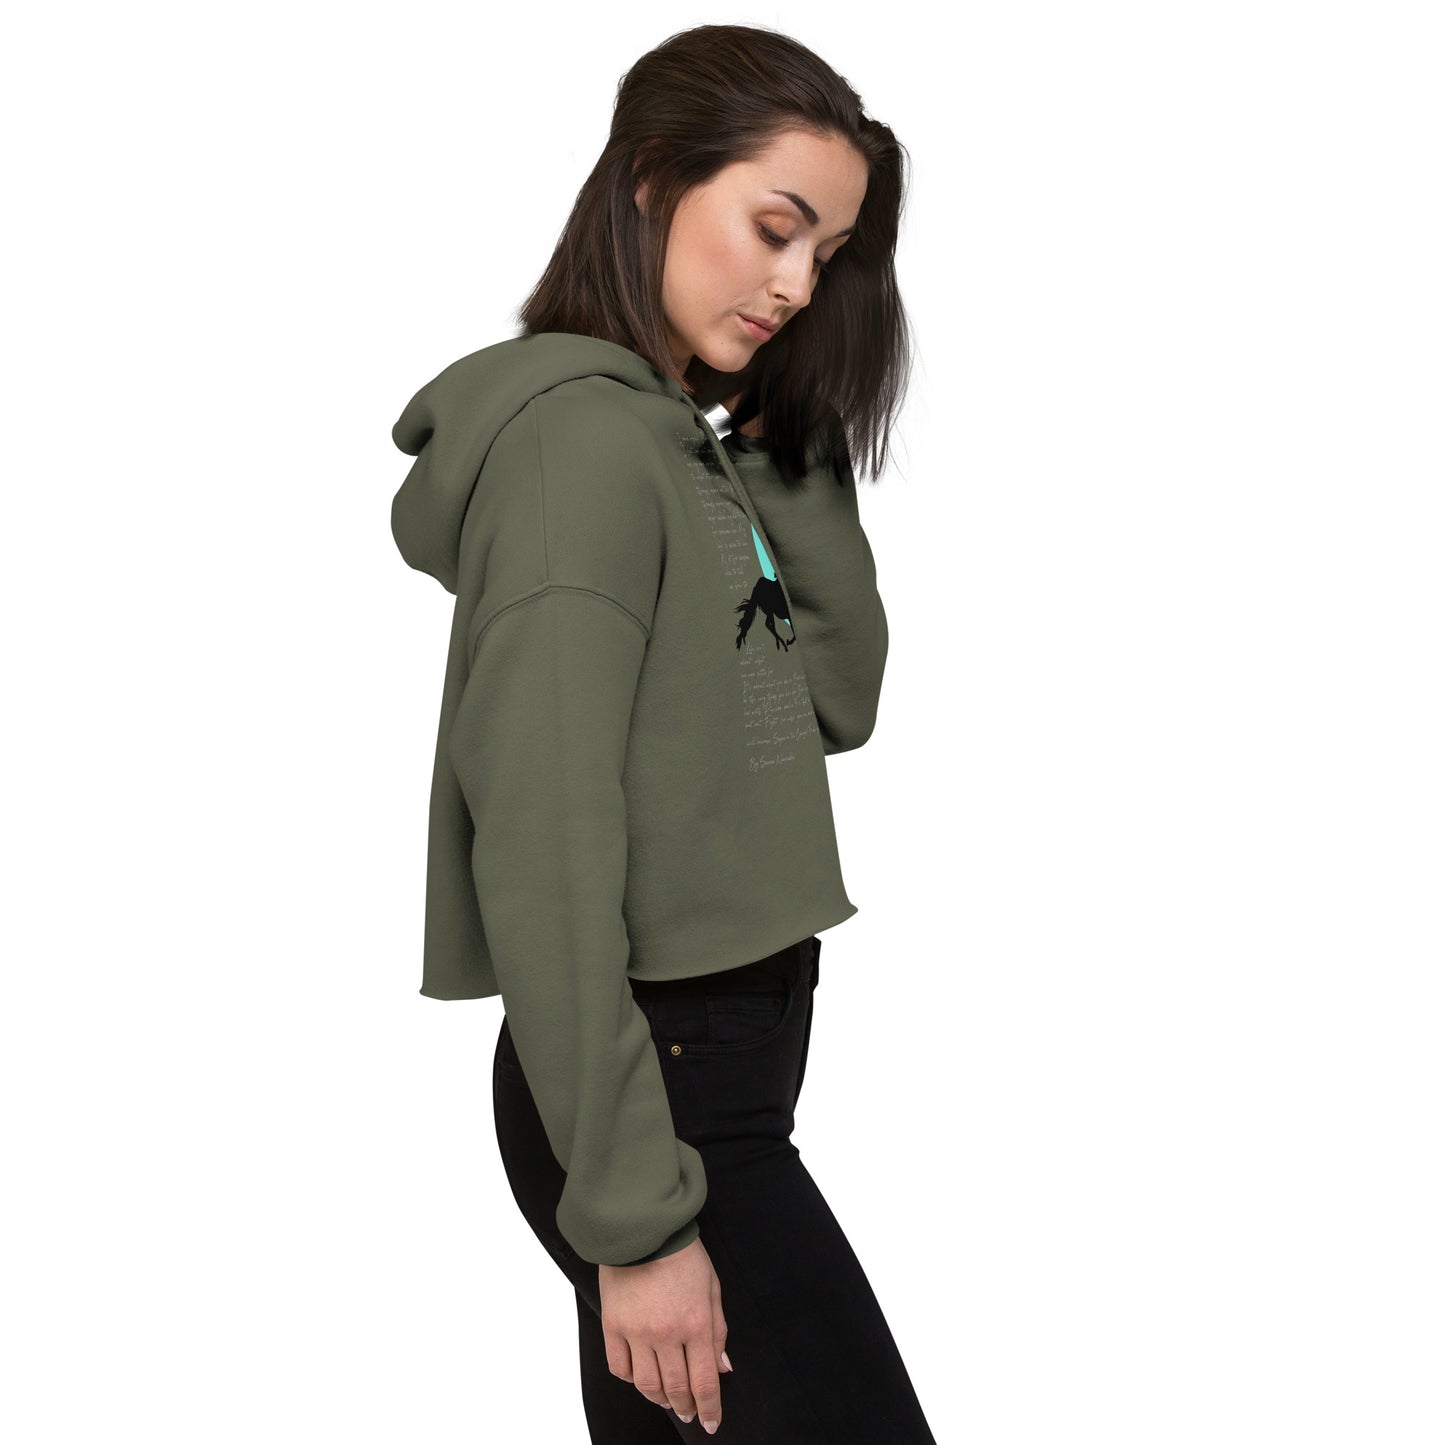 SIGUE A TU CORAZON (Listen to your Heart) Cropped Hoodie (Military Green)